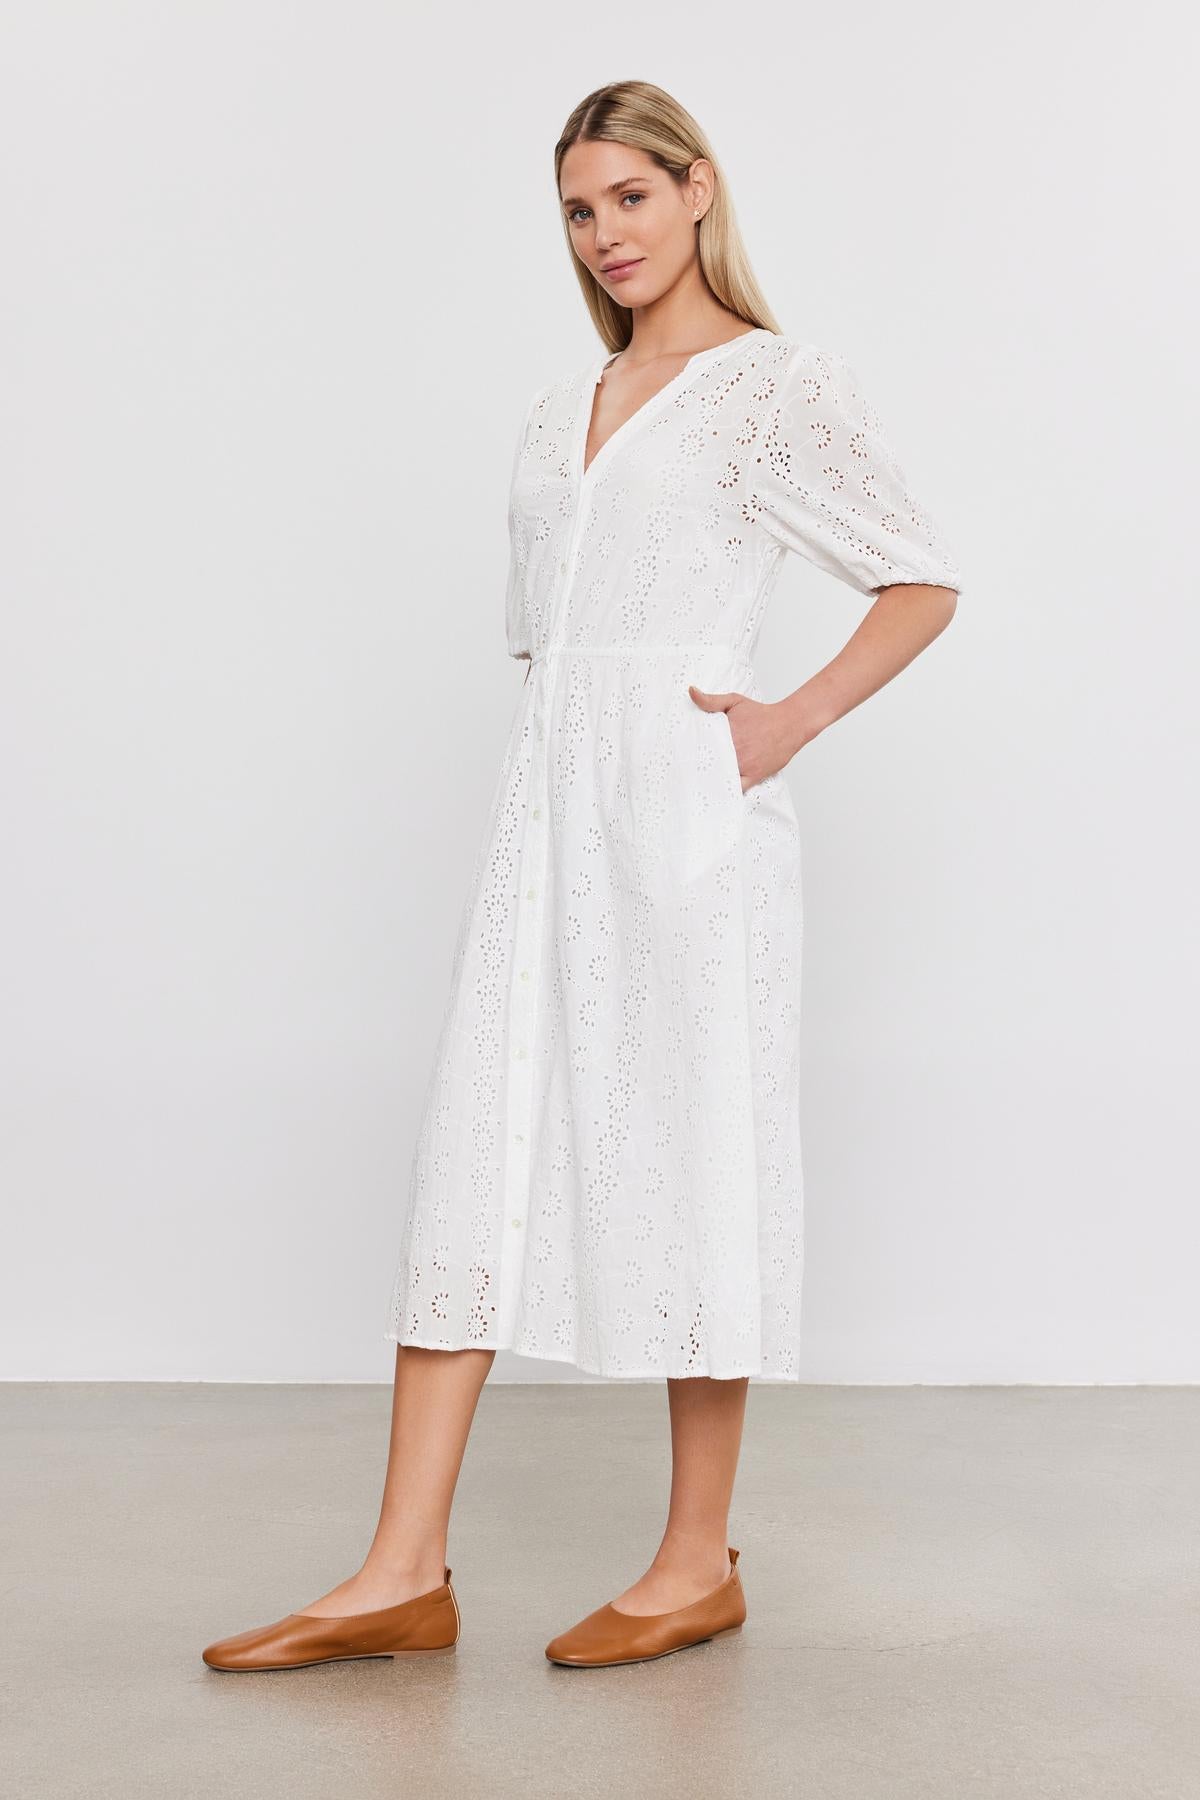   Woman in a white cotton eyelet RORI DRESS with puff sleeves and brown flat shoes, standing against a plain gray background from Velvet by Graham & Spencer. 